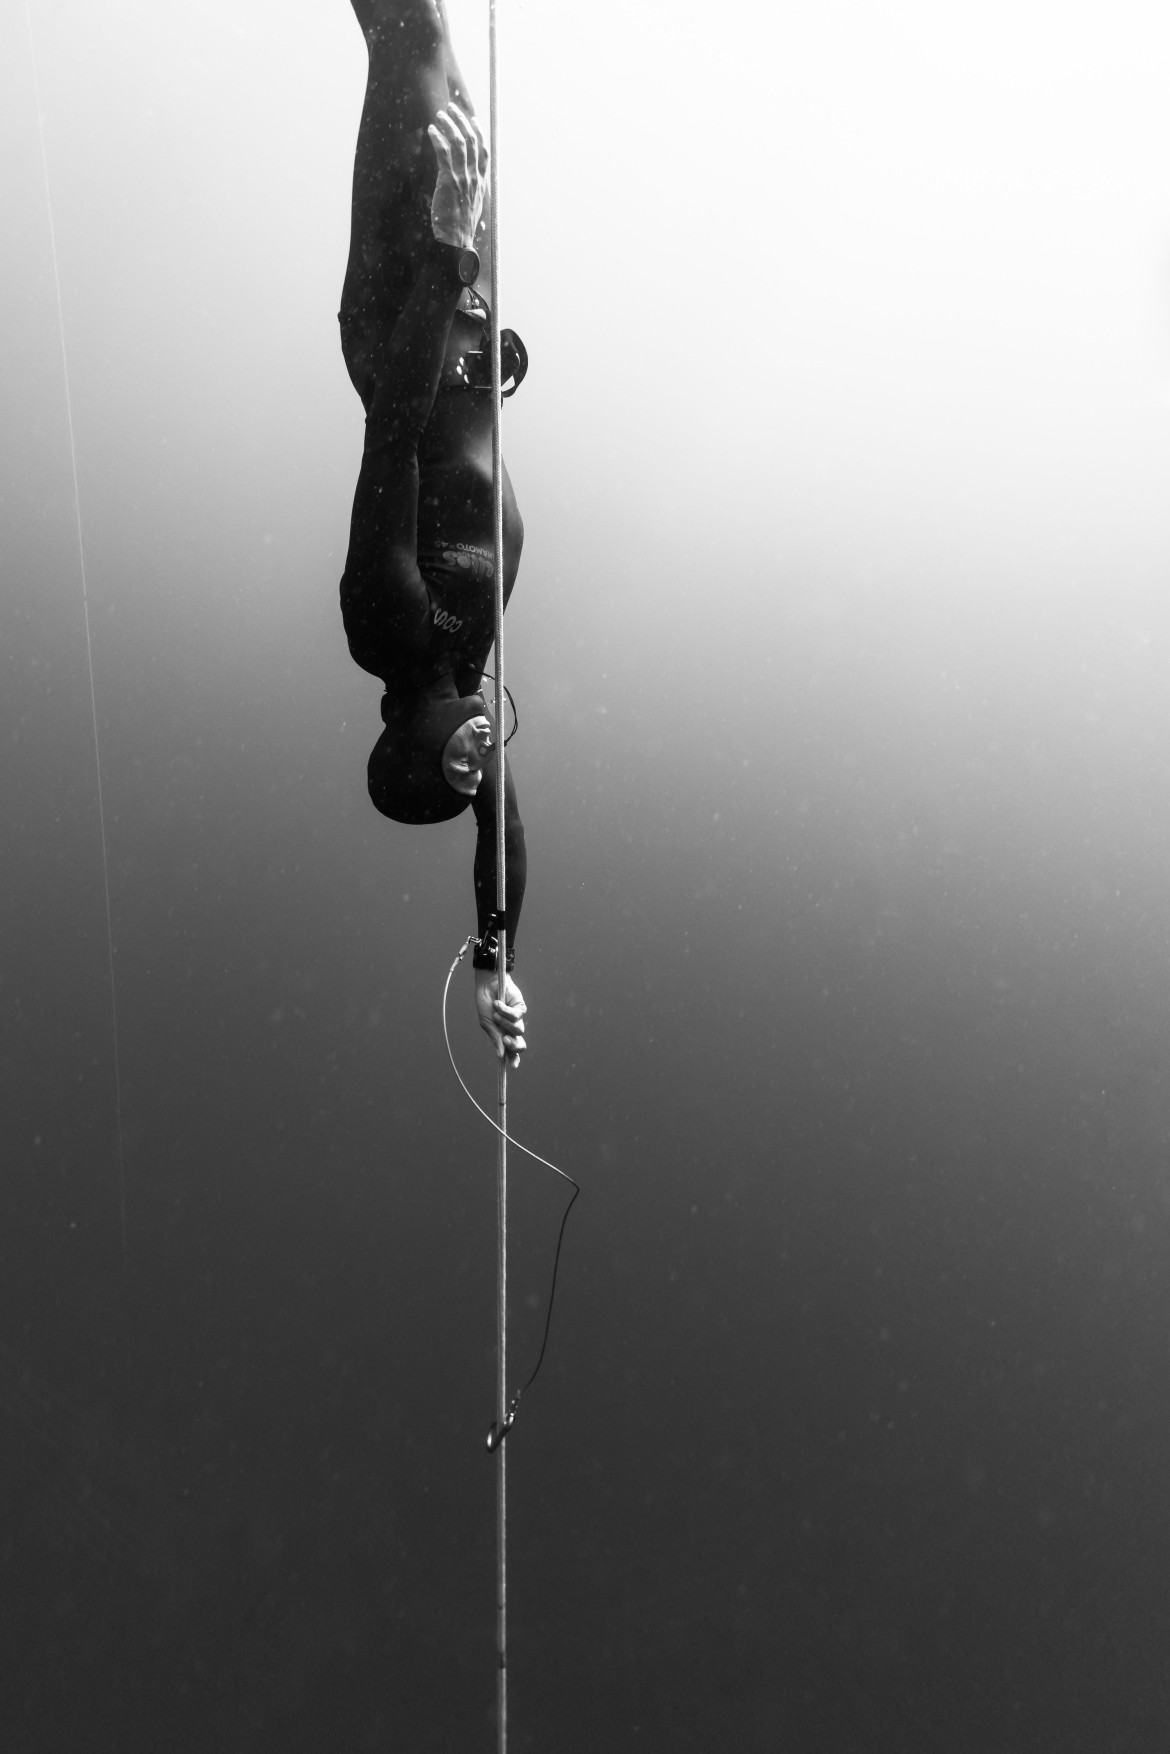 fot. Kohei Ueno, Beneath the surface of competitive Freediving, Sports Photographer Of the Year, Professional